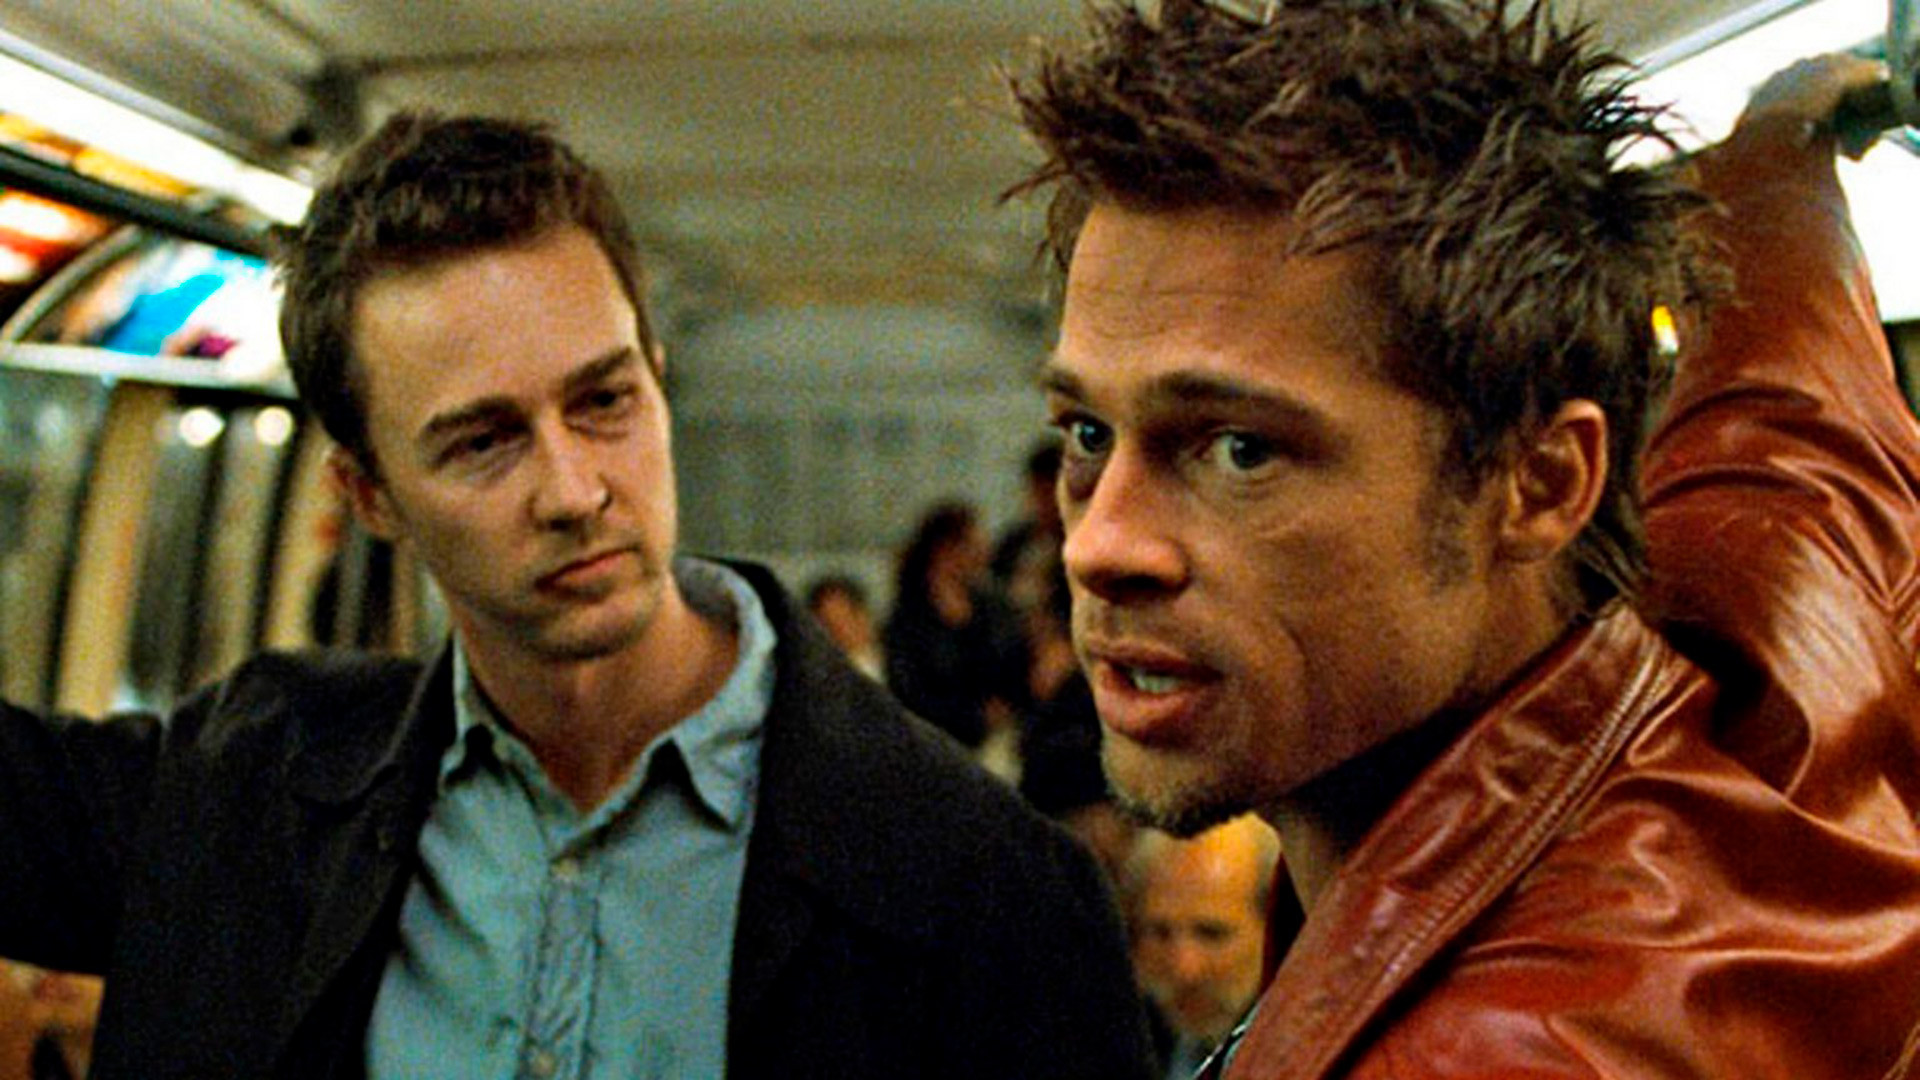 David Fincher played with the idea of multiple personality disorder in his film Fight Club.